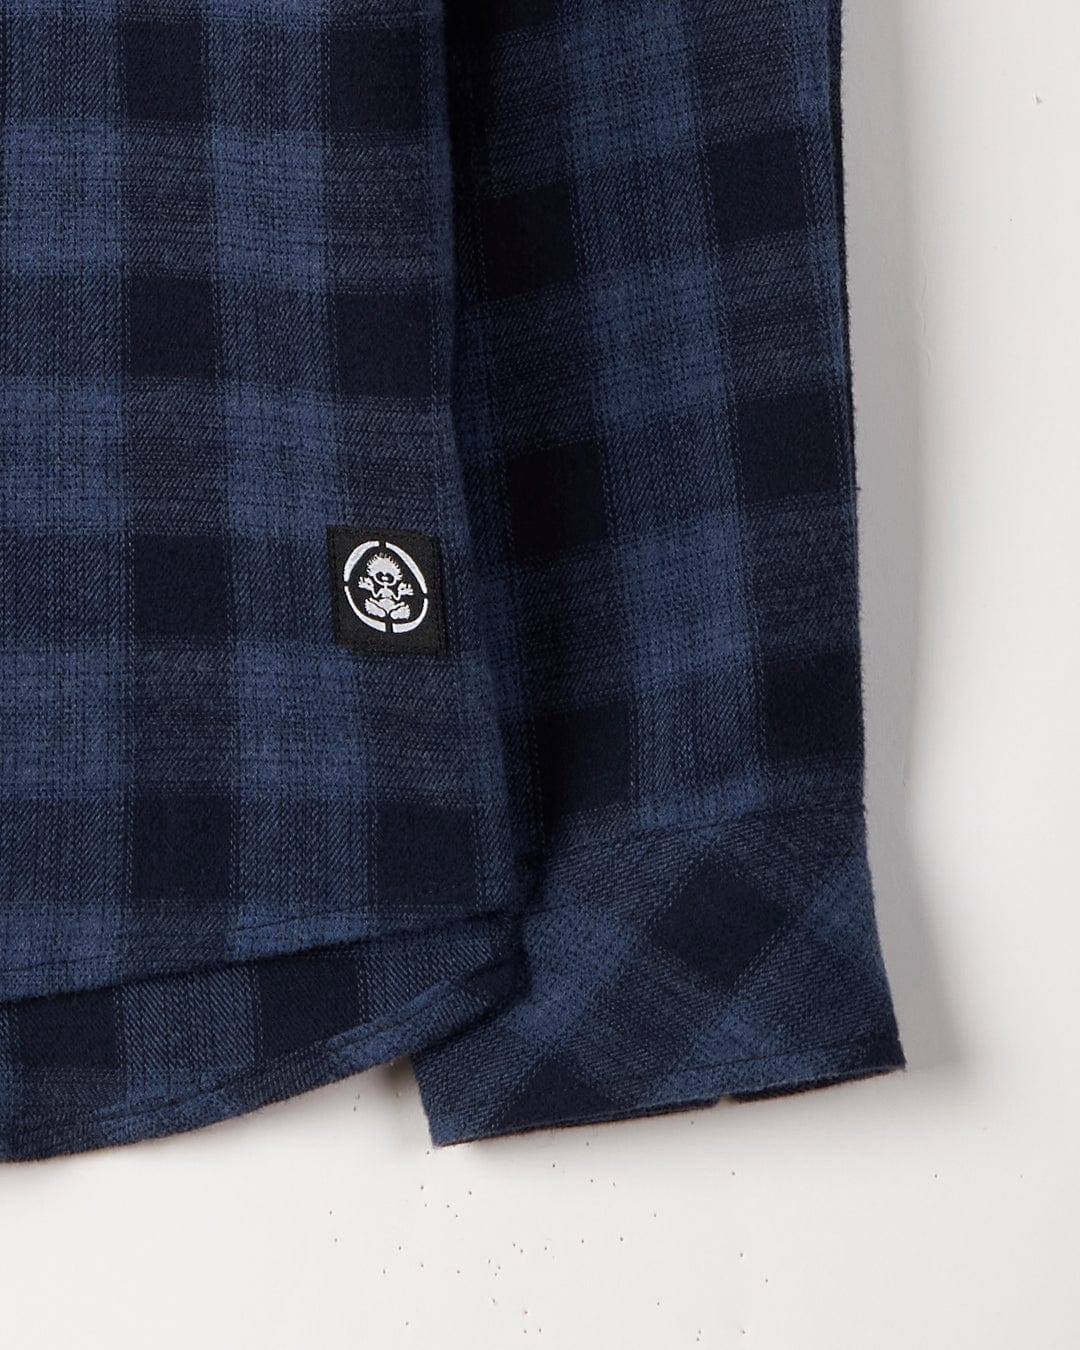 Close-up of a navy blue and black check print garment with a Saltrock branded tag, made of 100% Cotton.